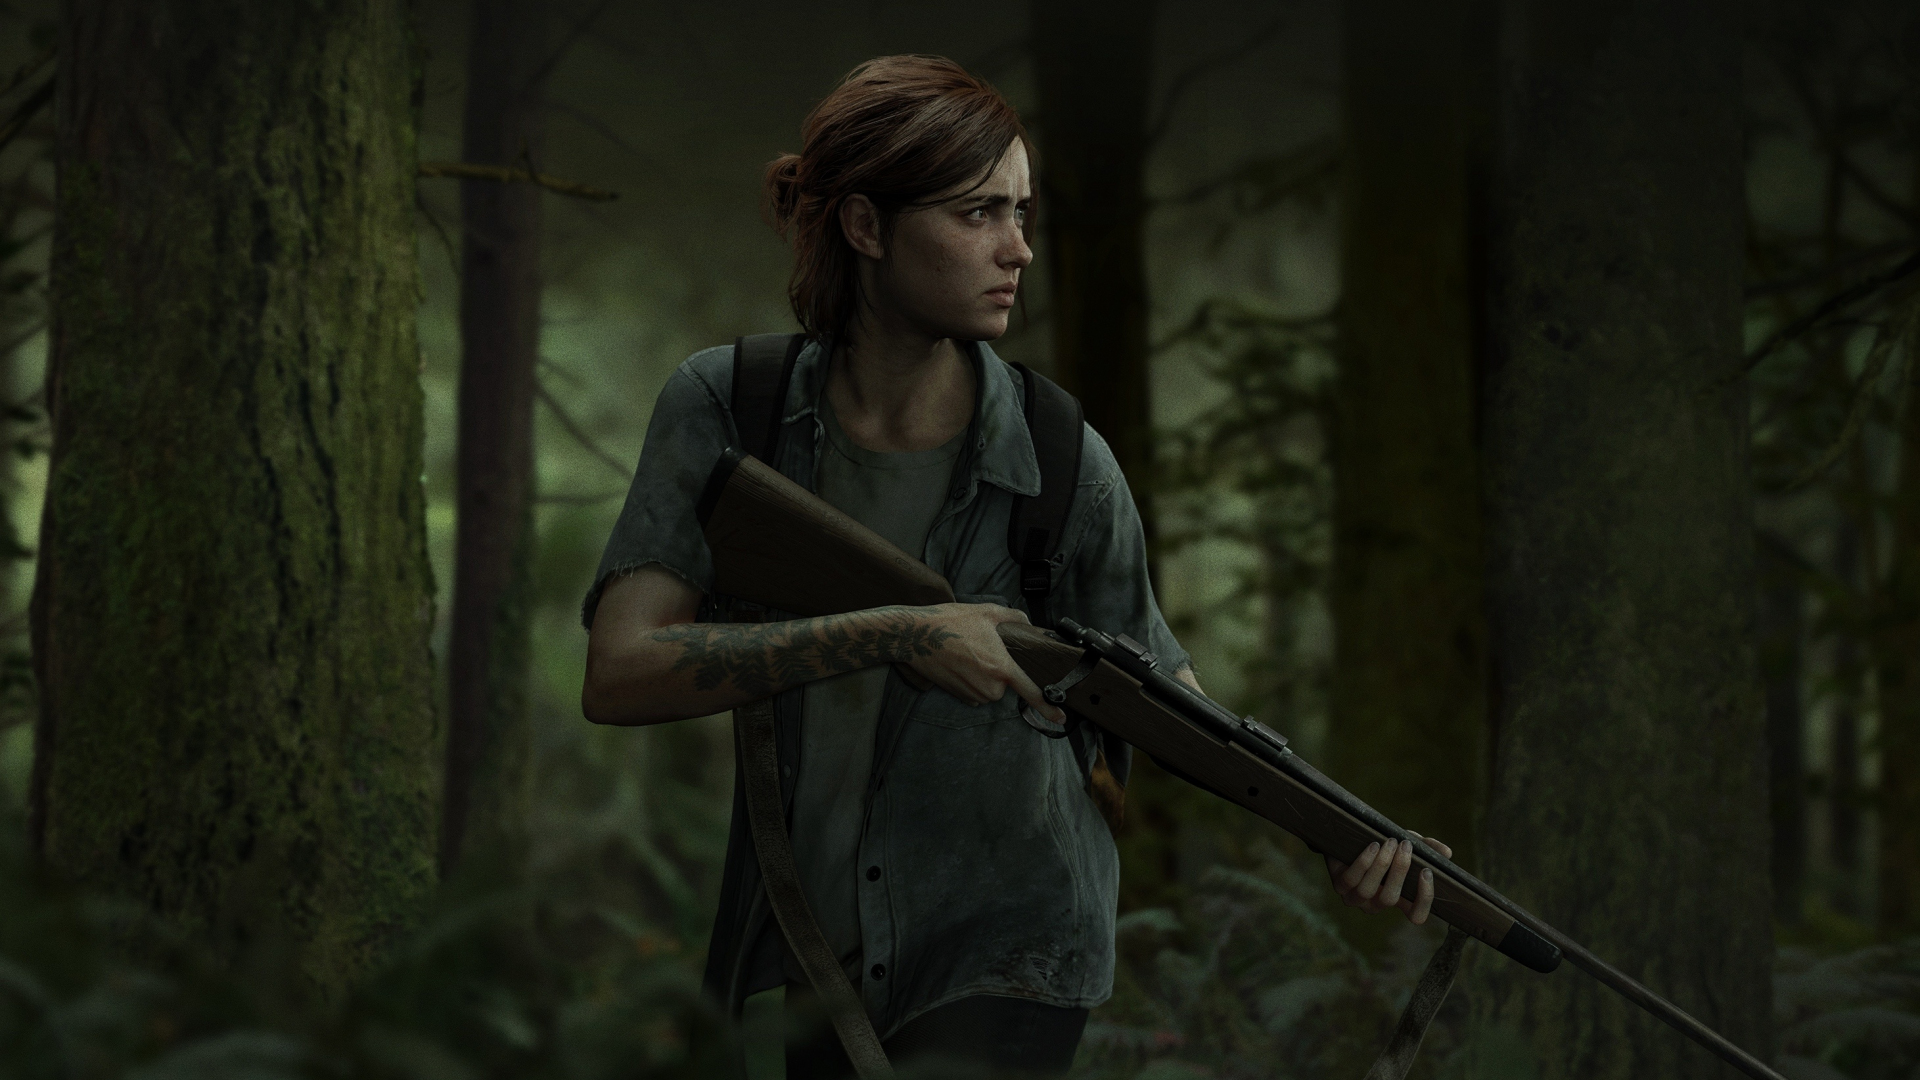 Download wallpaper 1920x1080 the last of us, ellie, outbreak day, full hd,  hdtv, fhd, 1080p wallpaper, 1920x1080 hd background, 15278